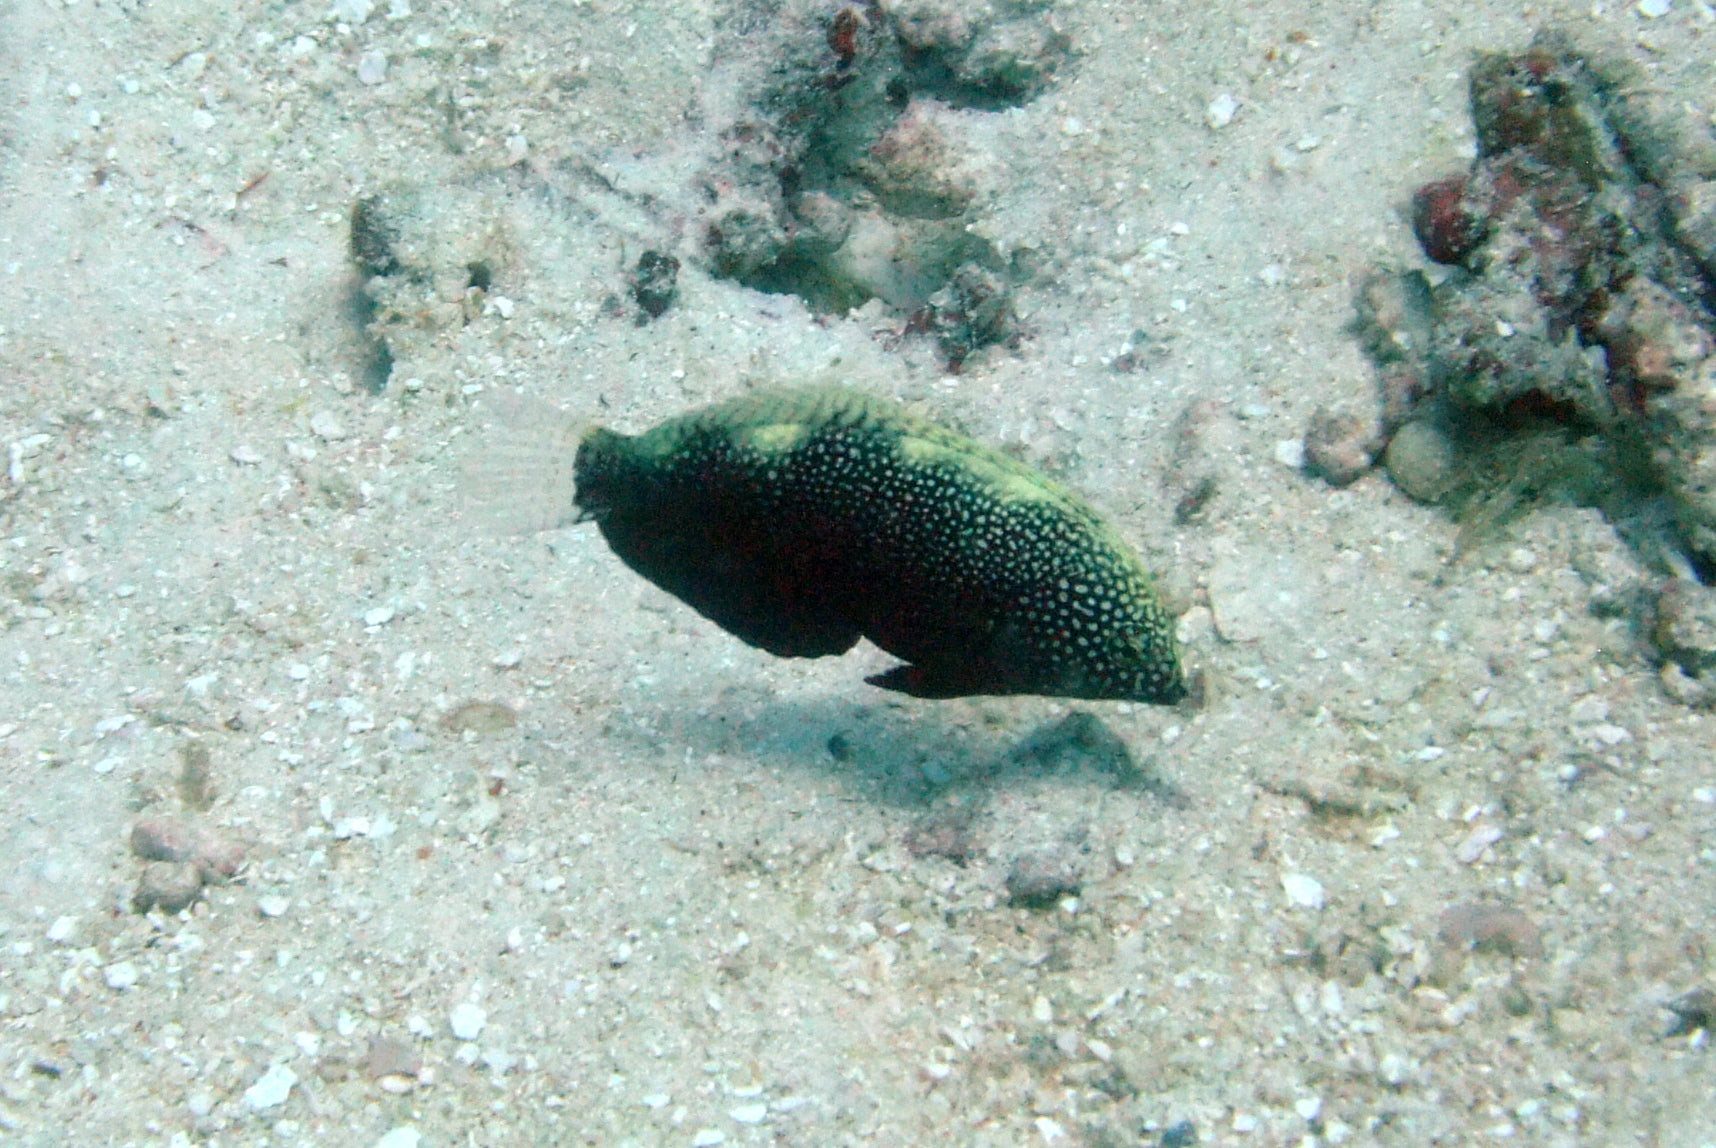 Black Leopard Wrasse - Violet Sea Fish and Coral